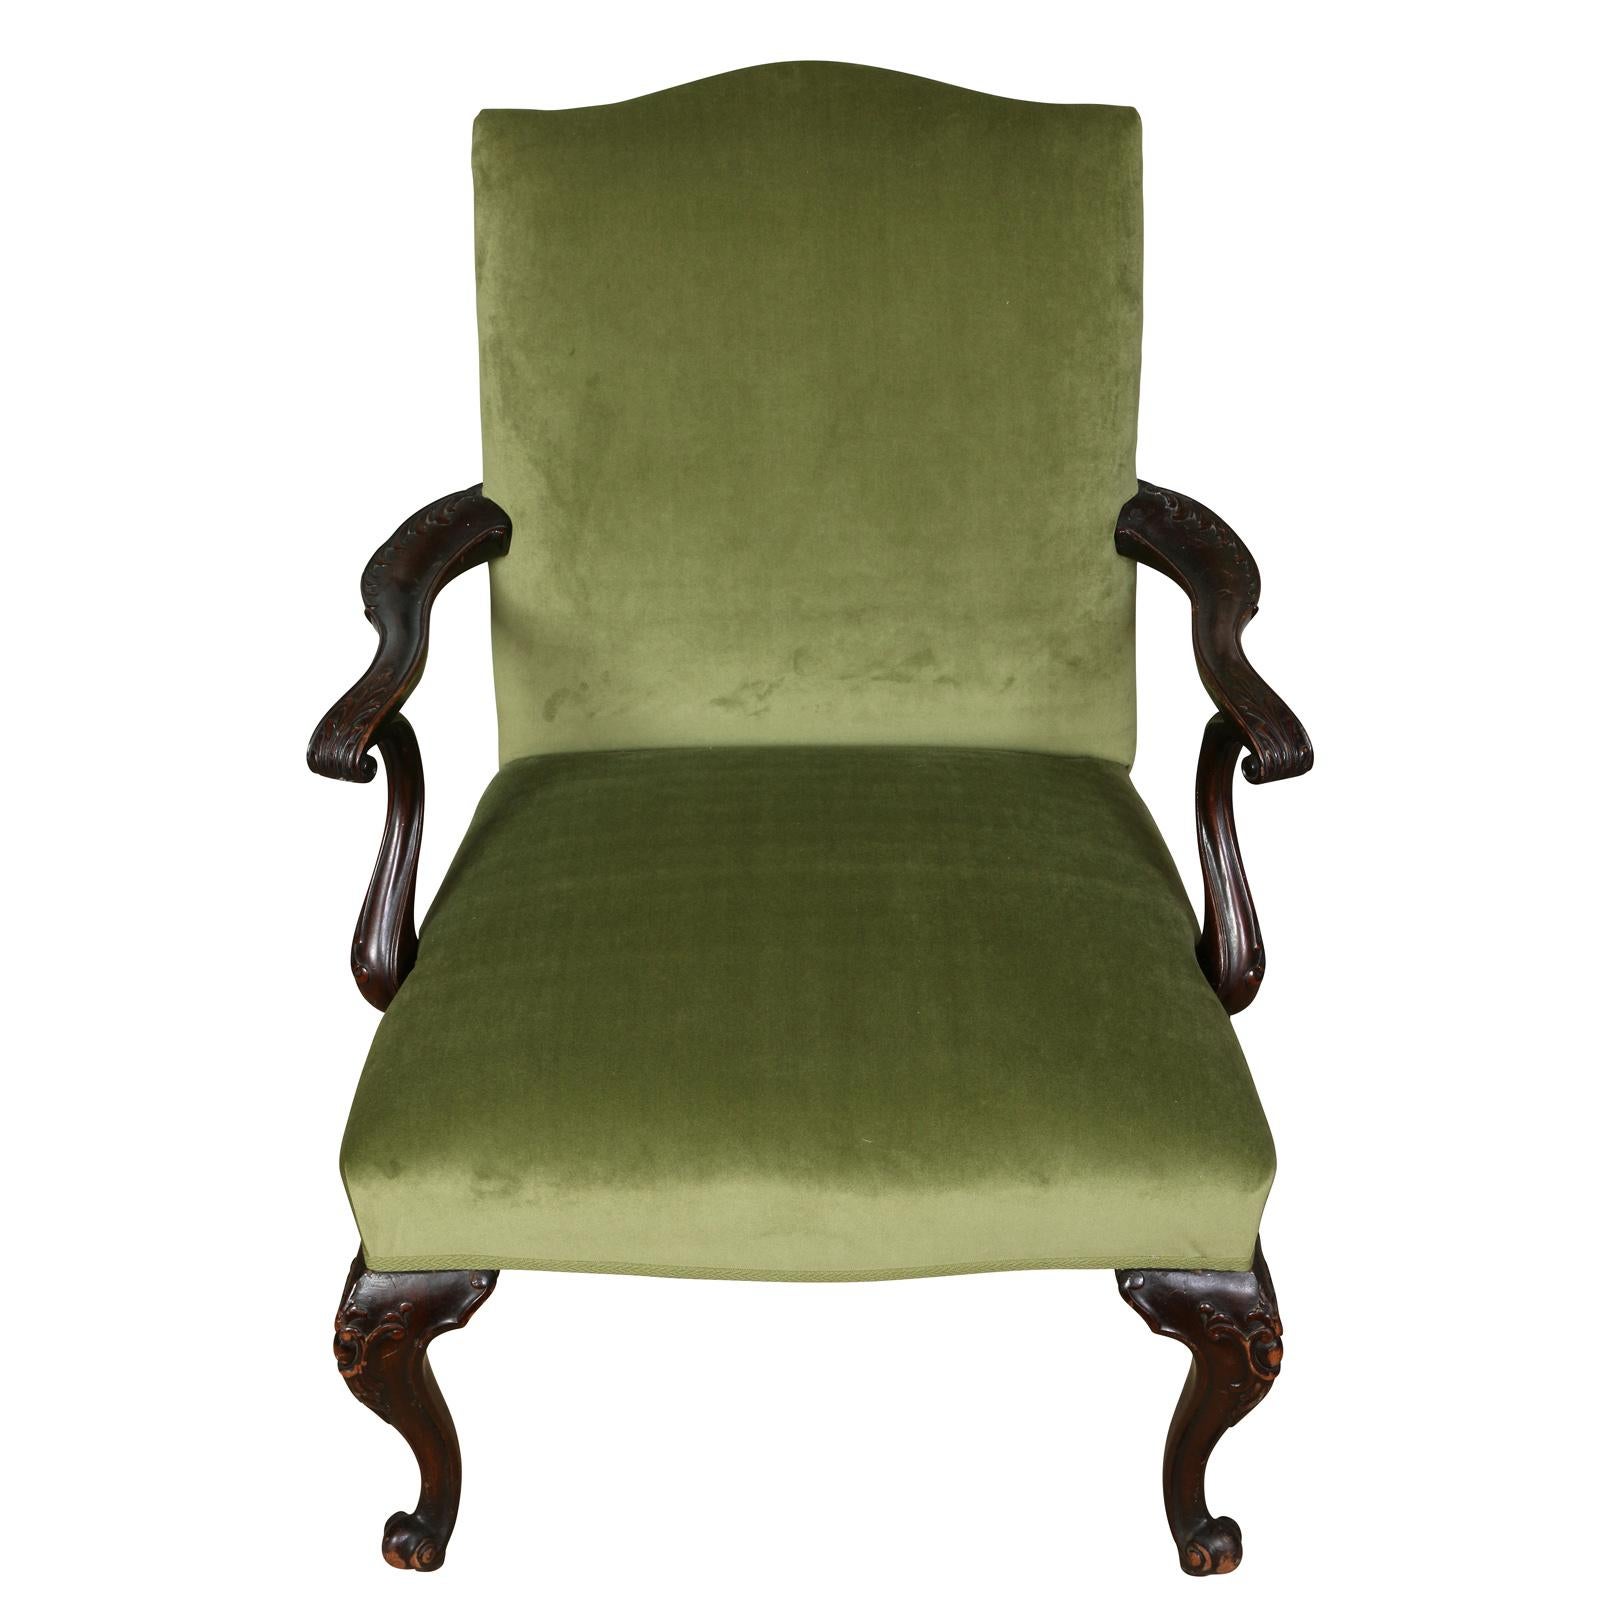 Chippendale Style Arm Chair with Newly Upholstered Green Velvet In Good Condition For Sale In Locust Valley, NY